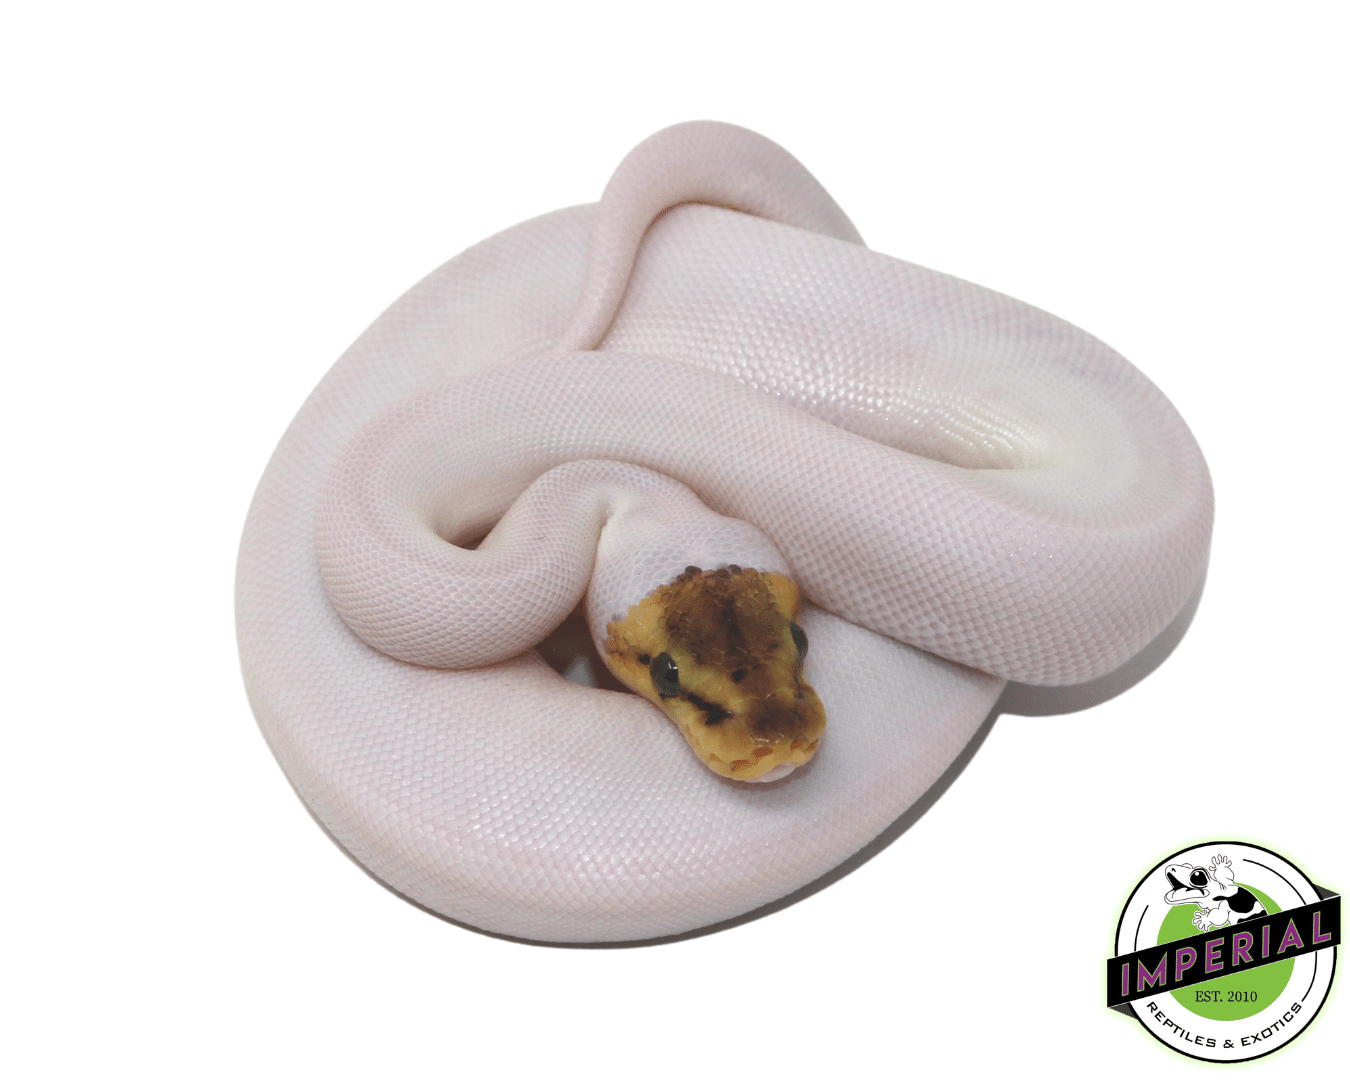 Bumble Bee Spied ball python for sale, buy reptiles online